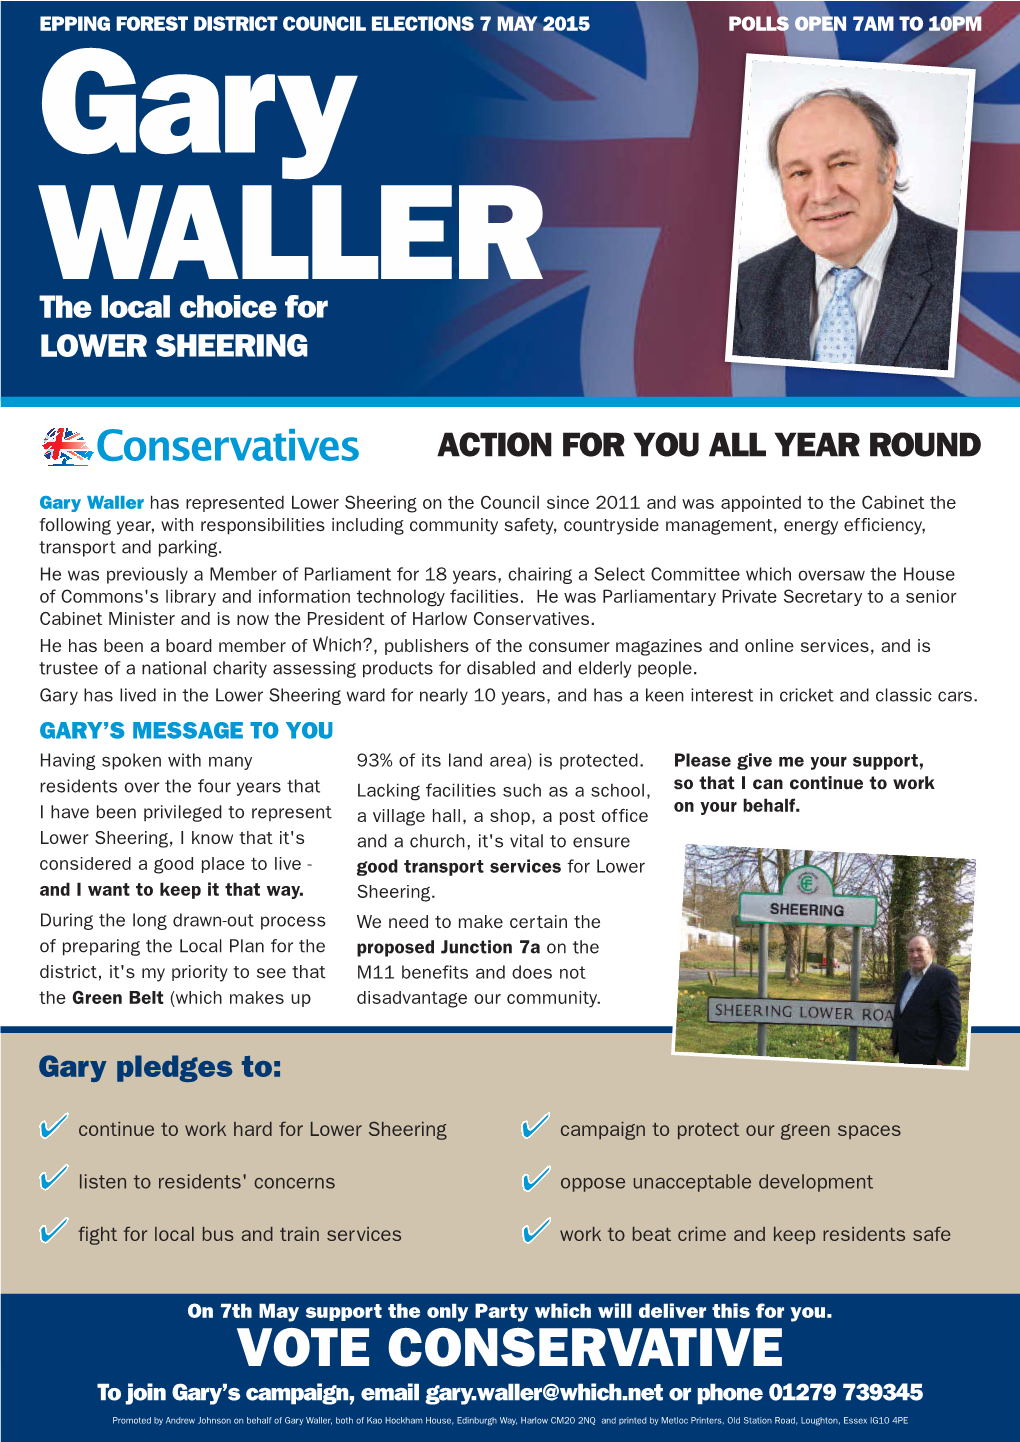 VOTE CONSERVATIVE to Join Gary’S Campaign, Email Gary.Waller@Which.Net Or Phone 01279 739345